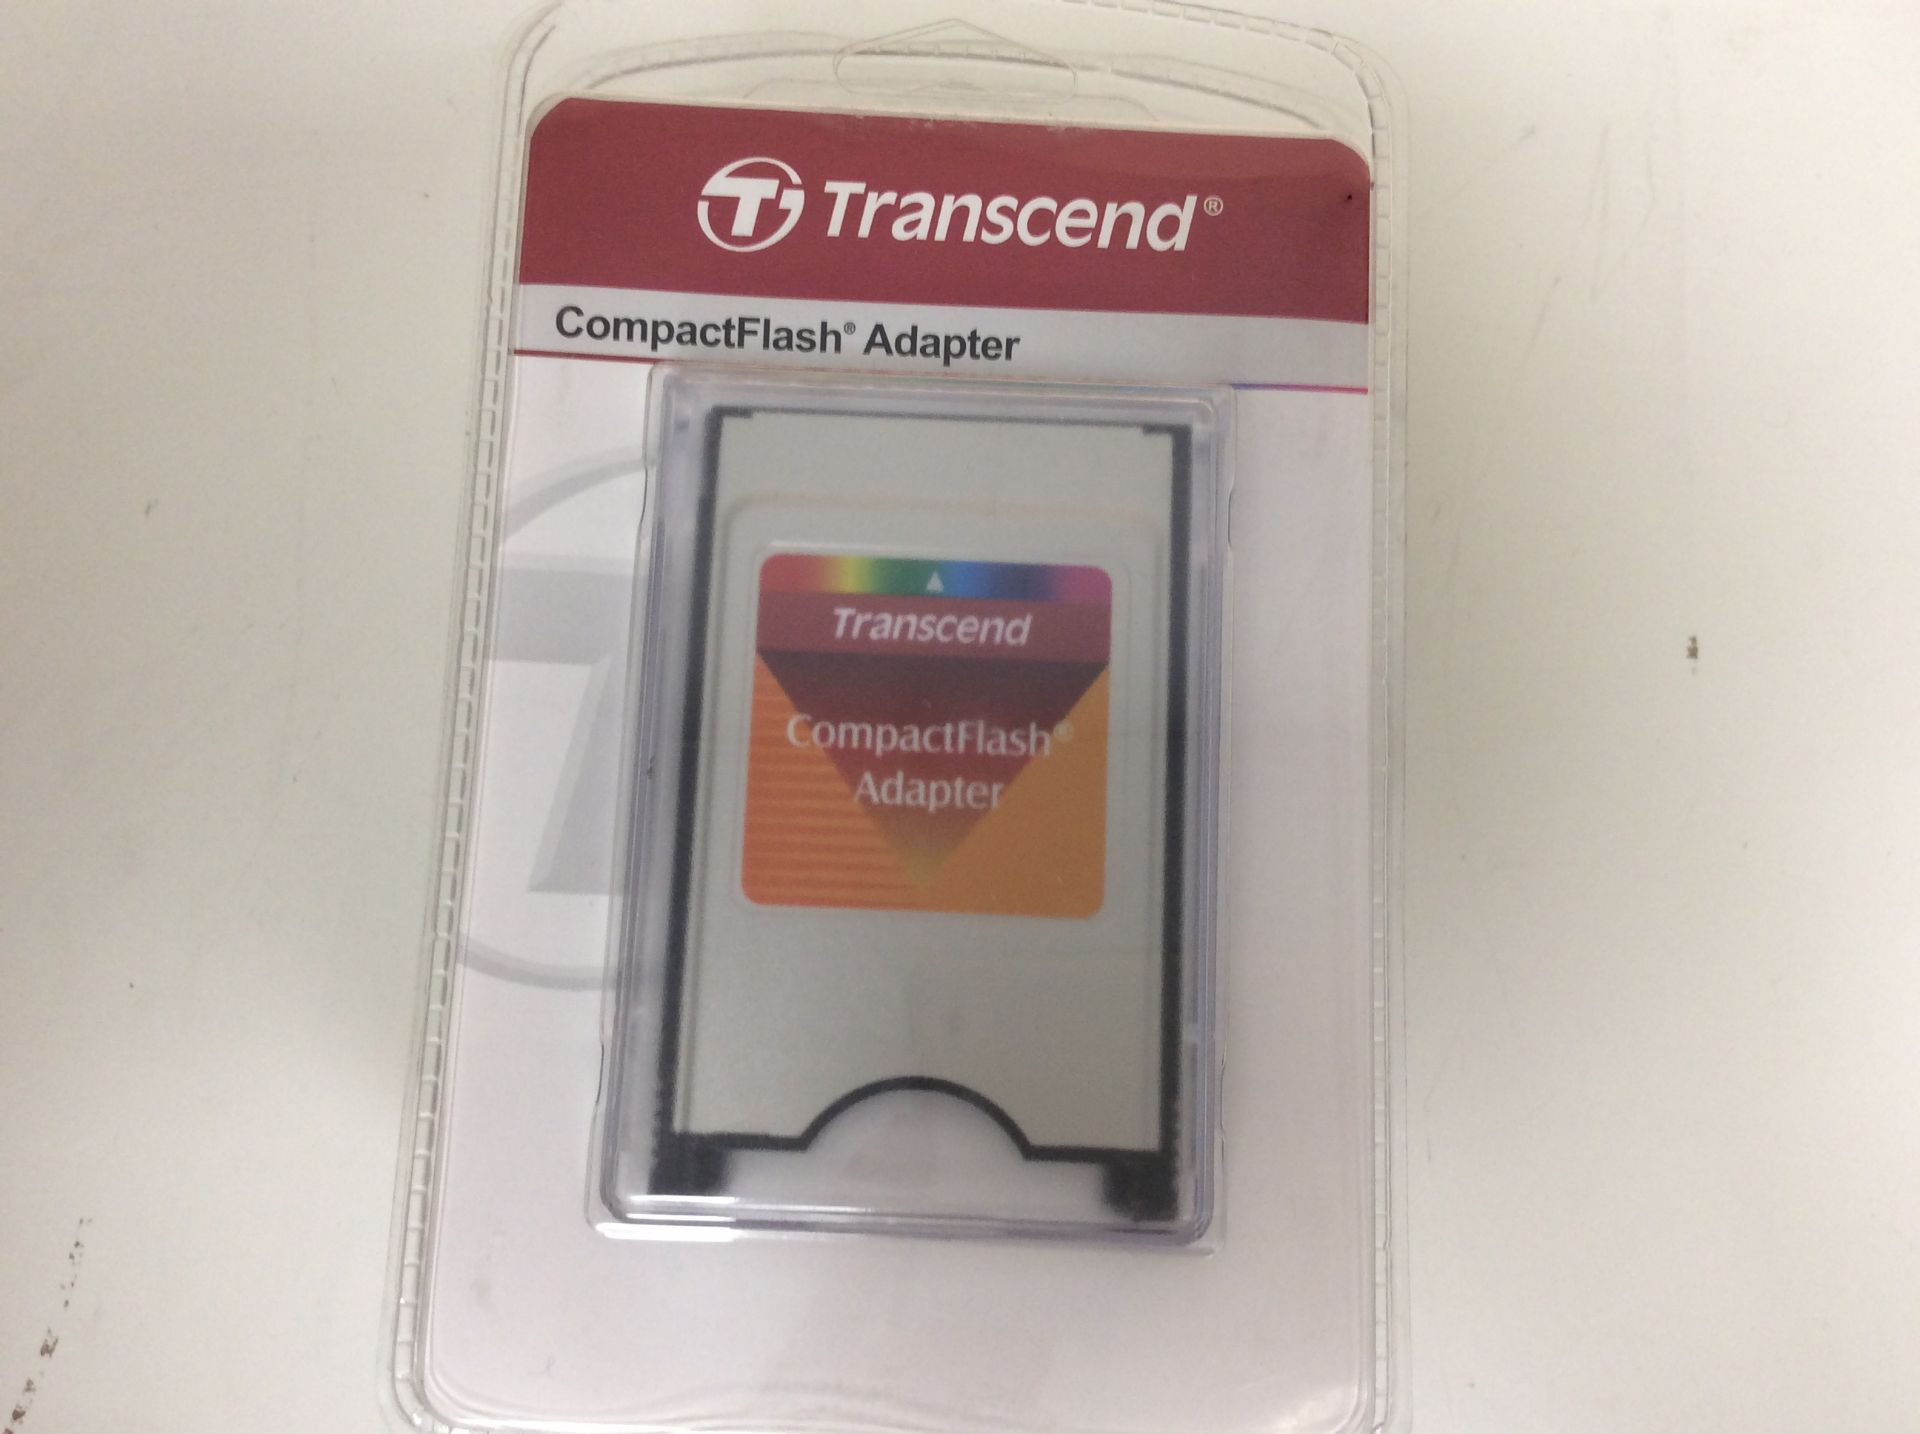 8x transcend compact flash adapter - Image 2 of 2